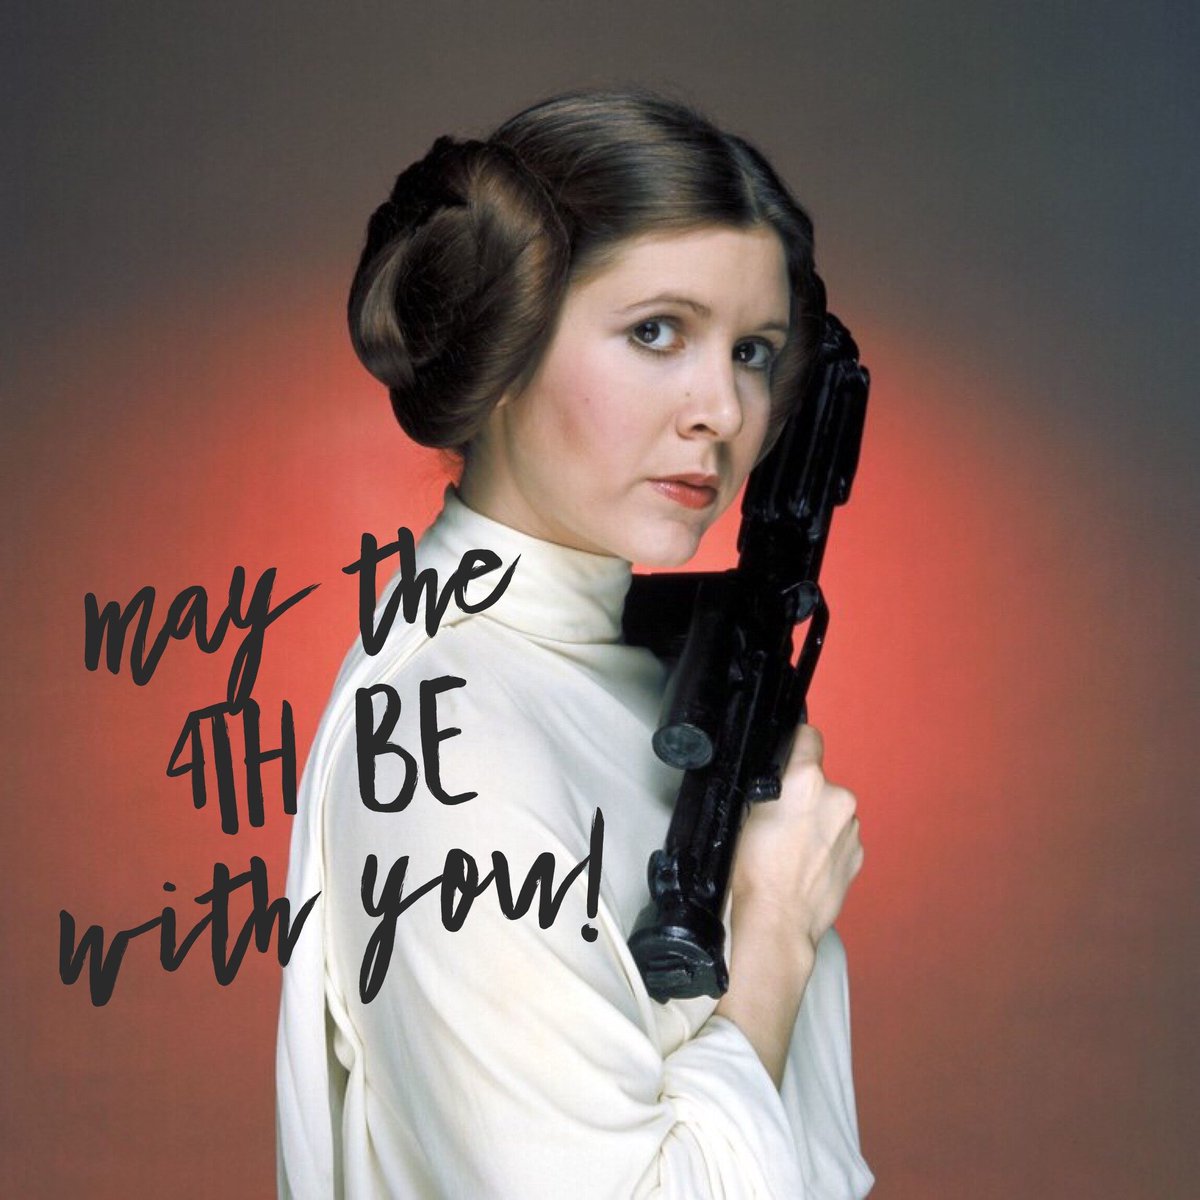 “Never be afraid of who you are” – Princess Leia #May4thBeWithYou 🤟💋